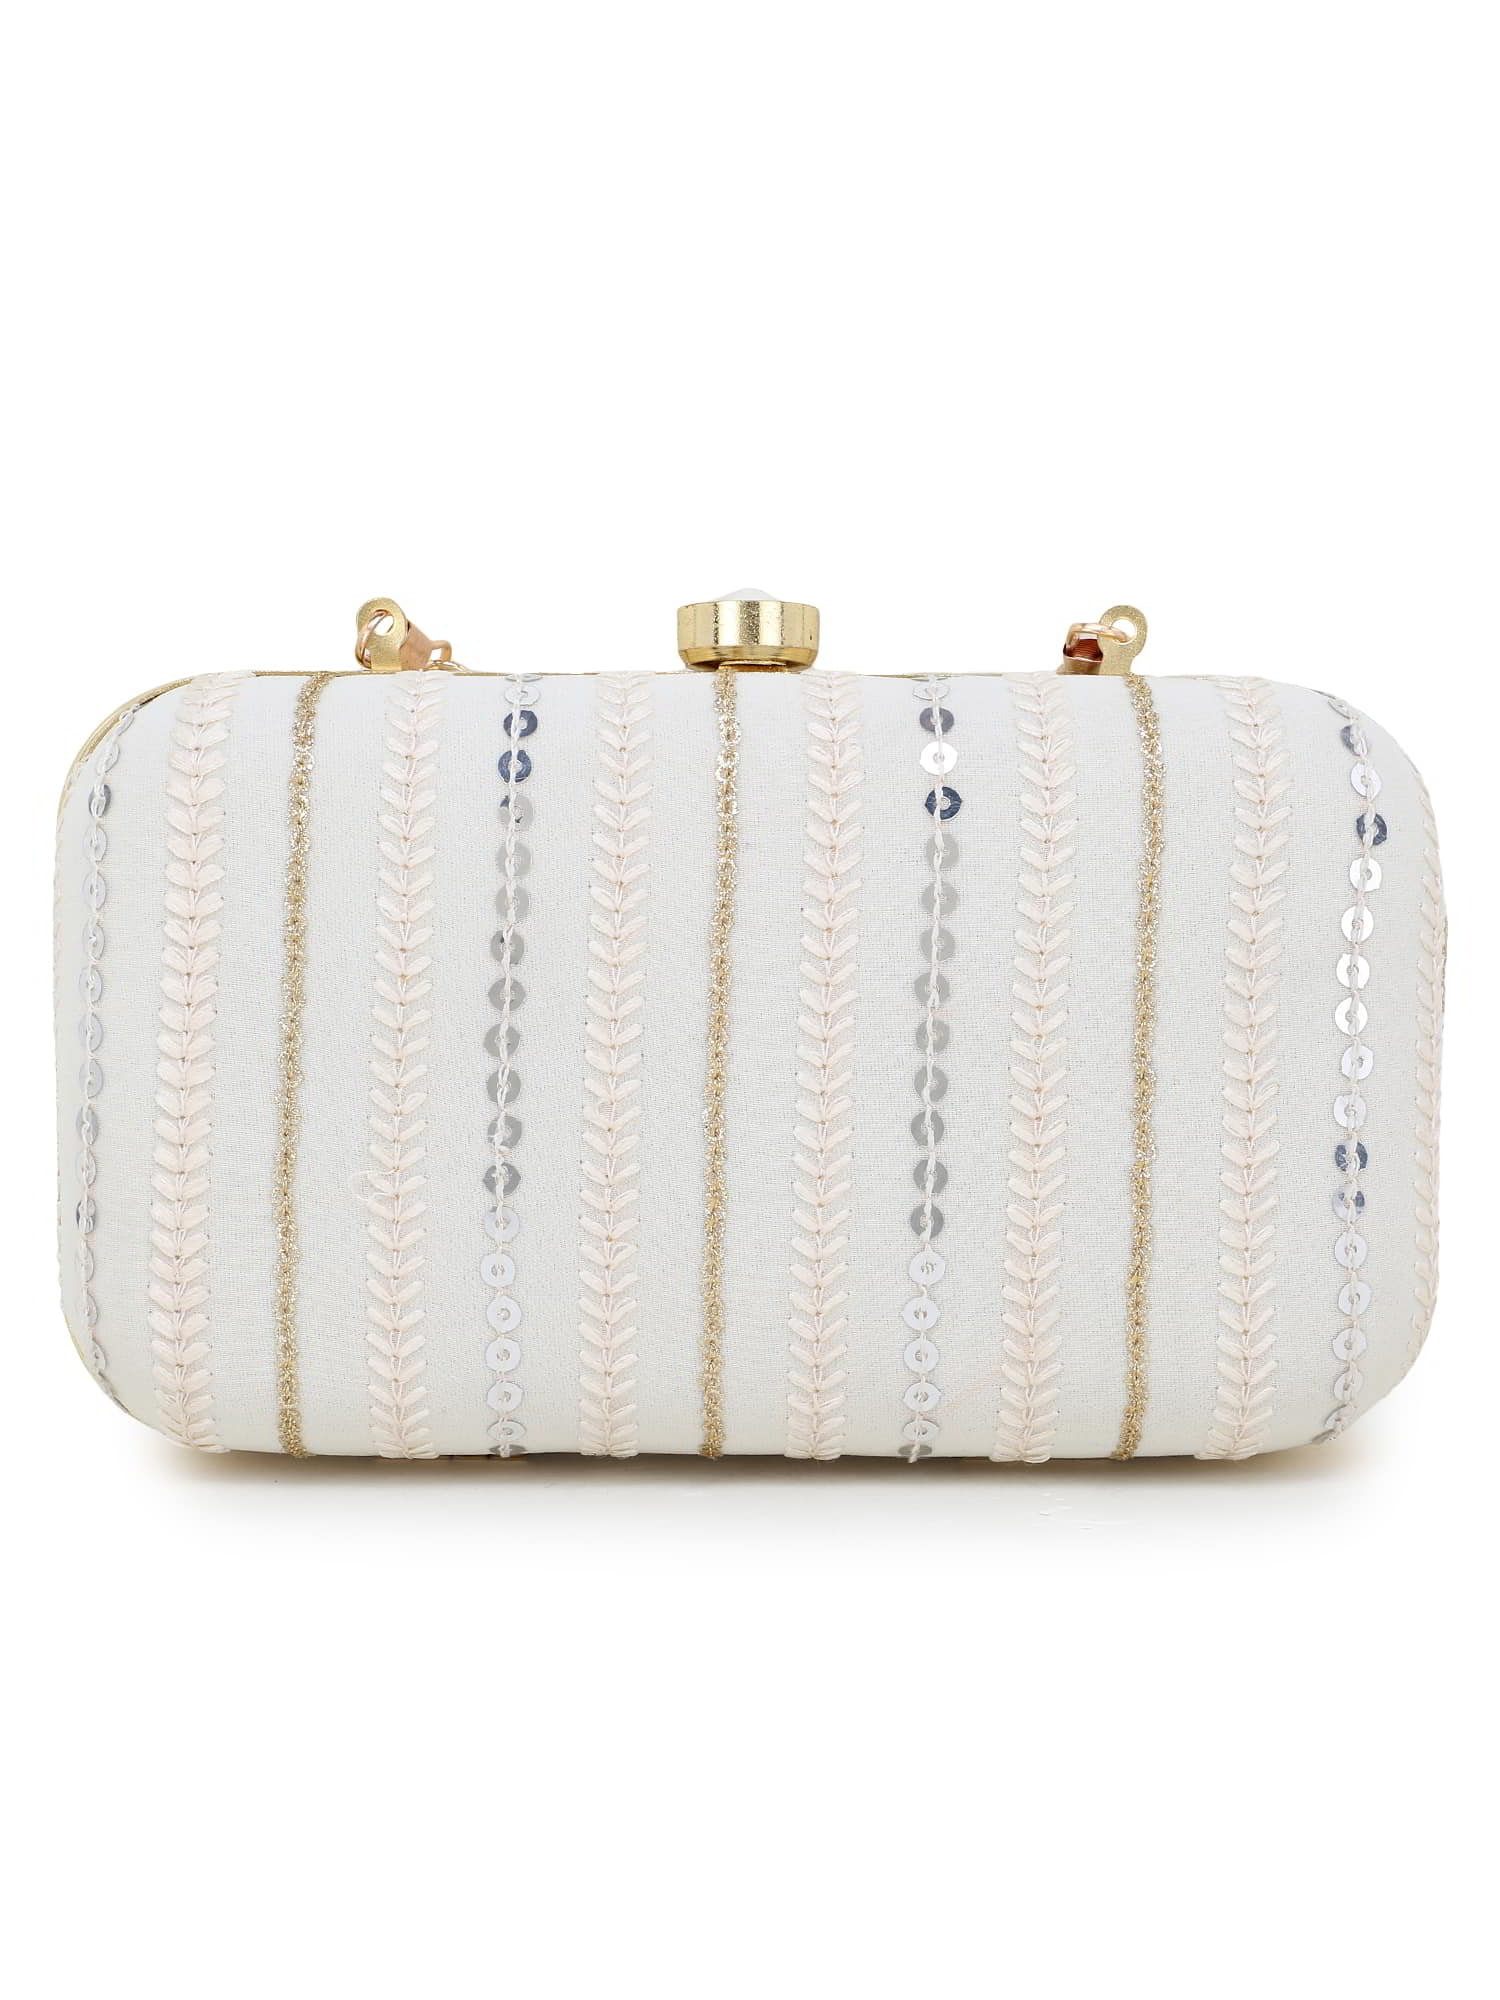 Tulle Striped Embellished Faux Silk Clutch